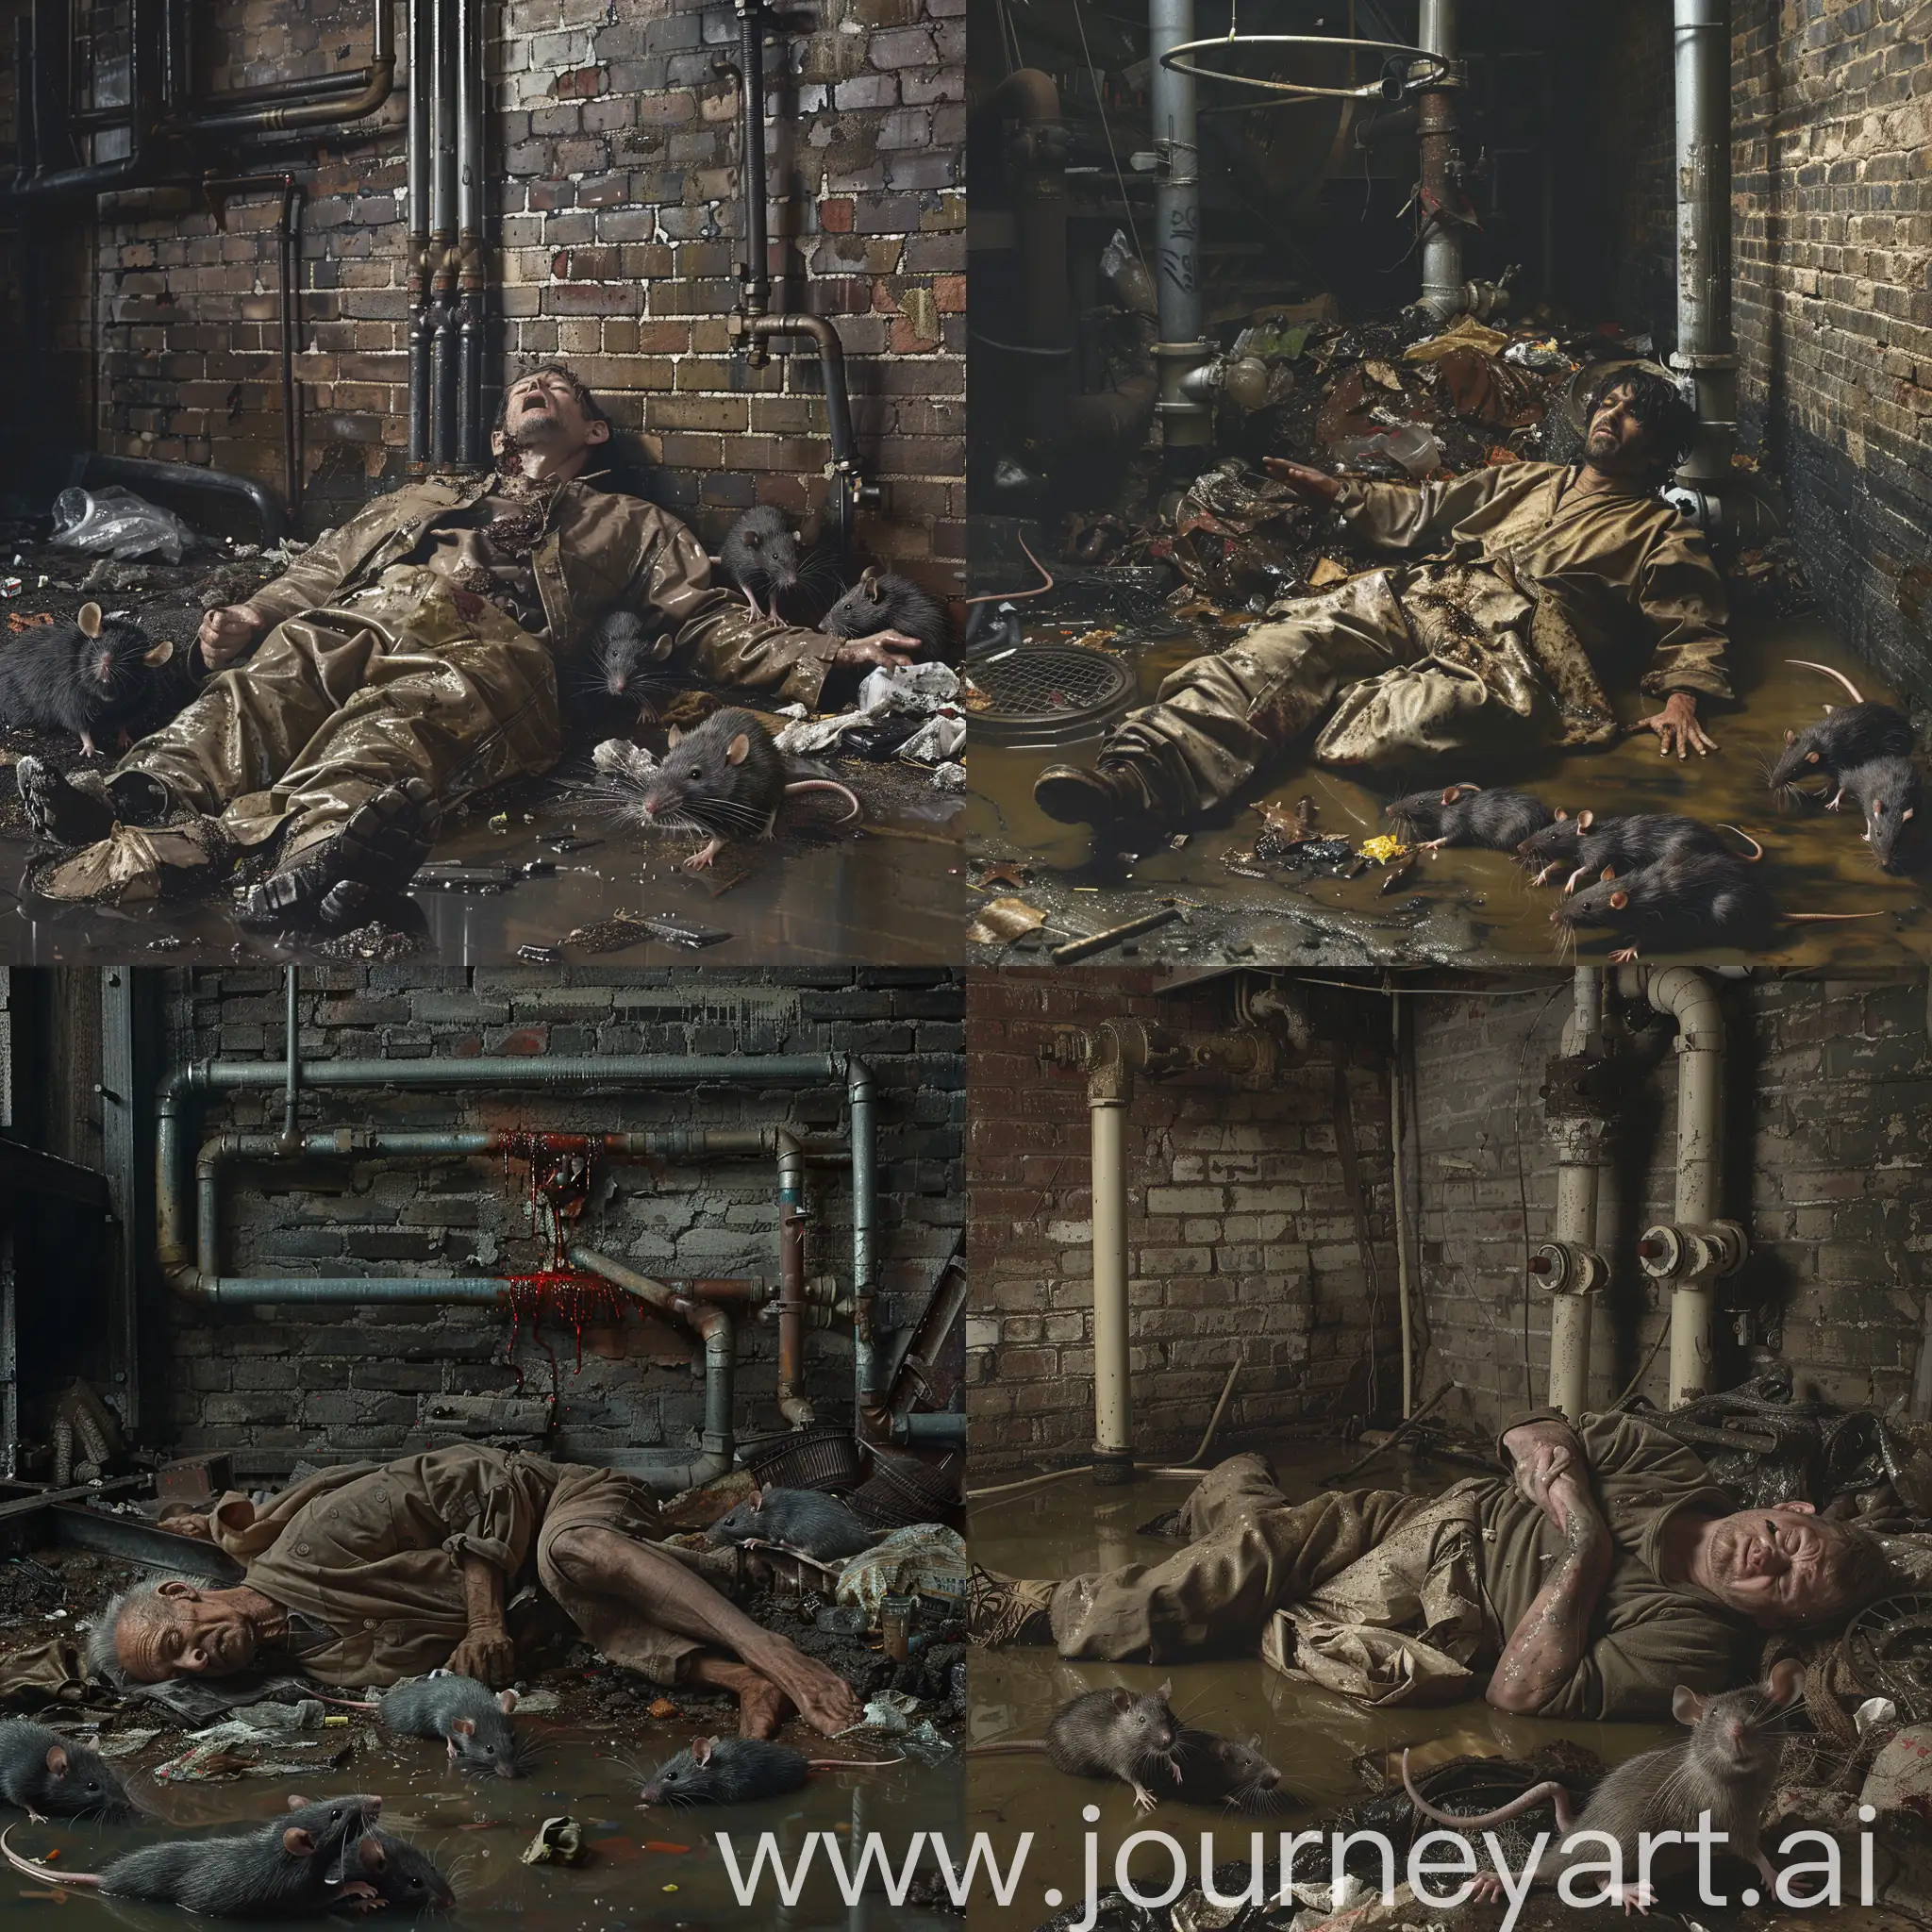 Homeless-Man-Under-Heat-Pipes-Attacked-by-Rats-Hyperrealistic-Urban-Scene